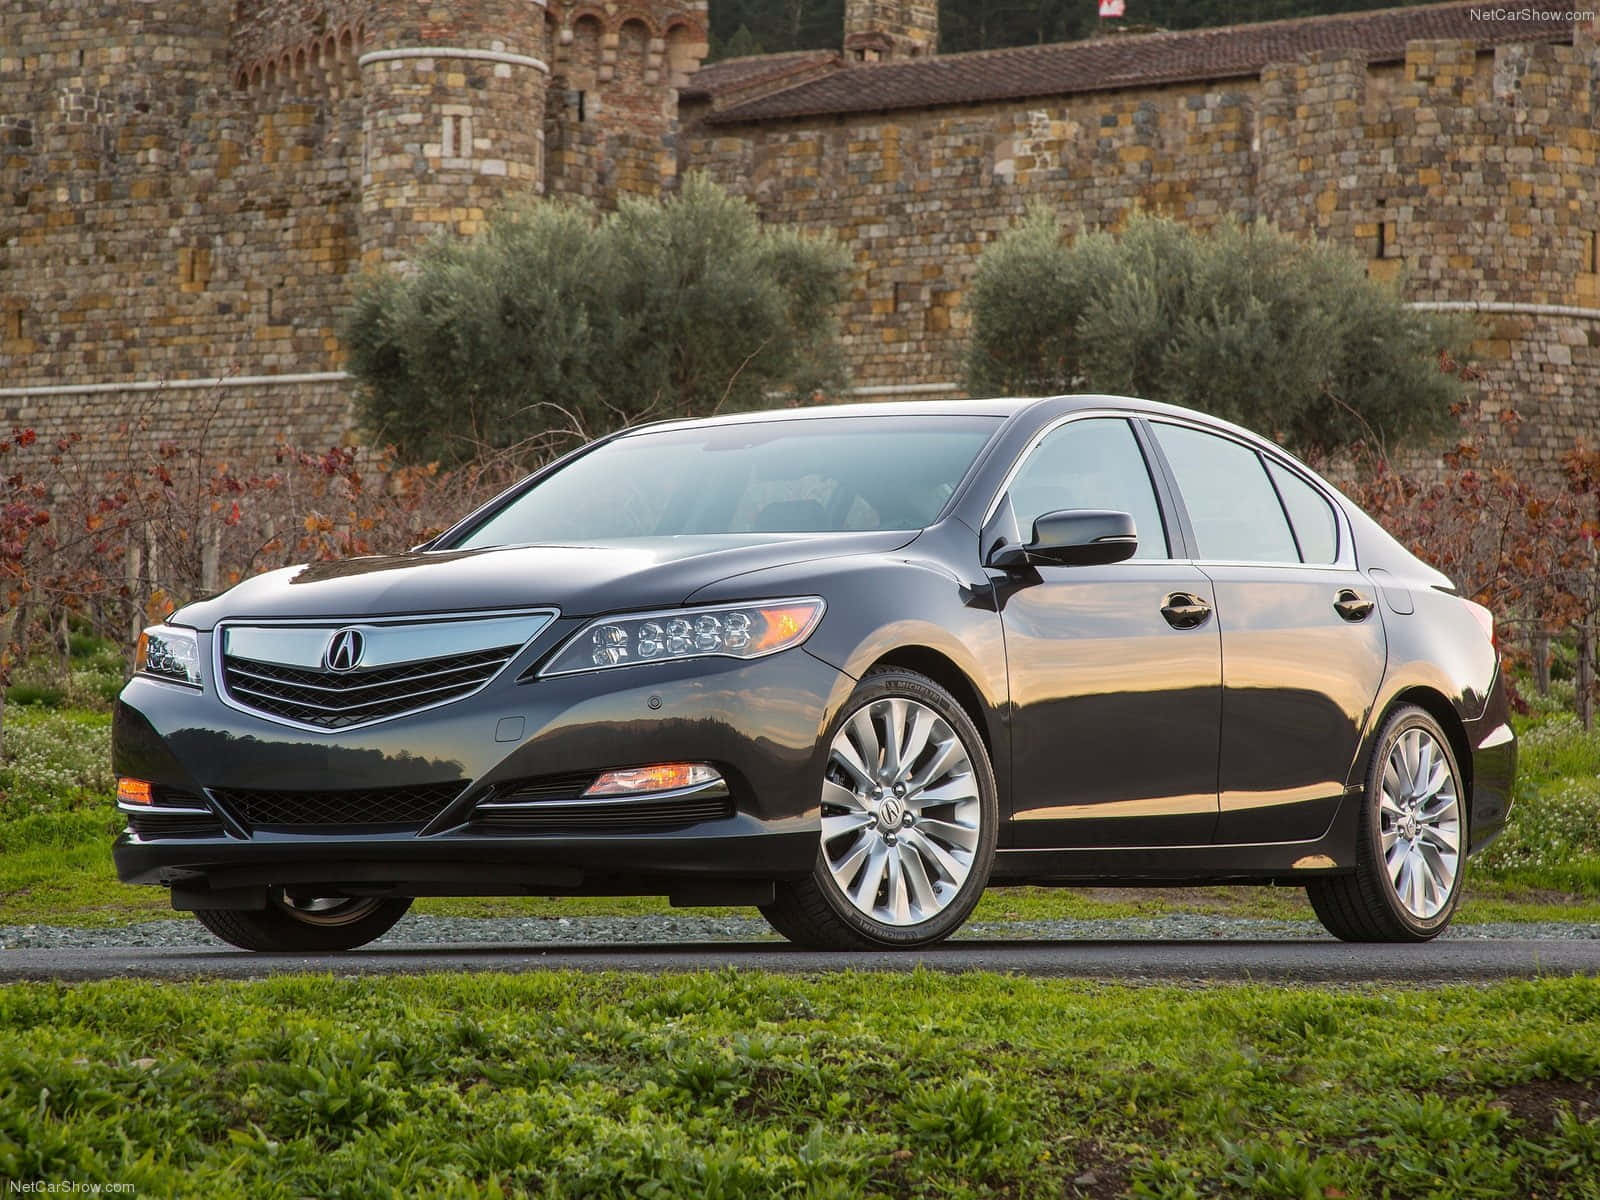 2023 Acura RLX: High Definition Photo on the Road Wallpaper